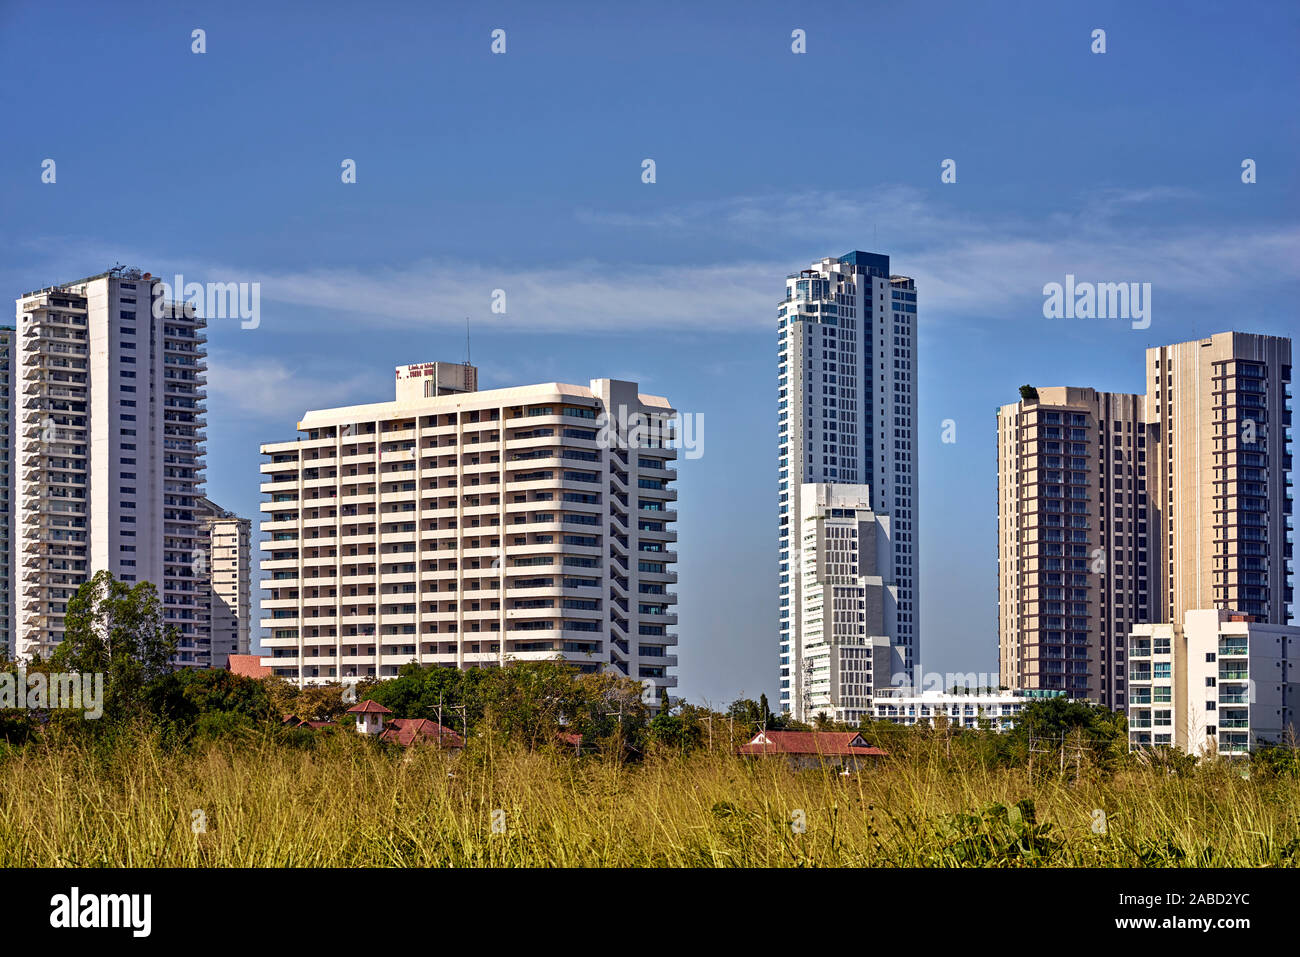 Thailand hotels. Asian architecture, buildings, structures Stock Photo